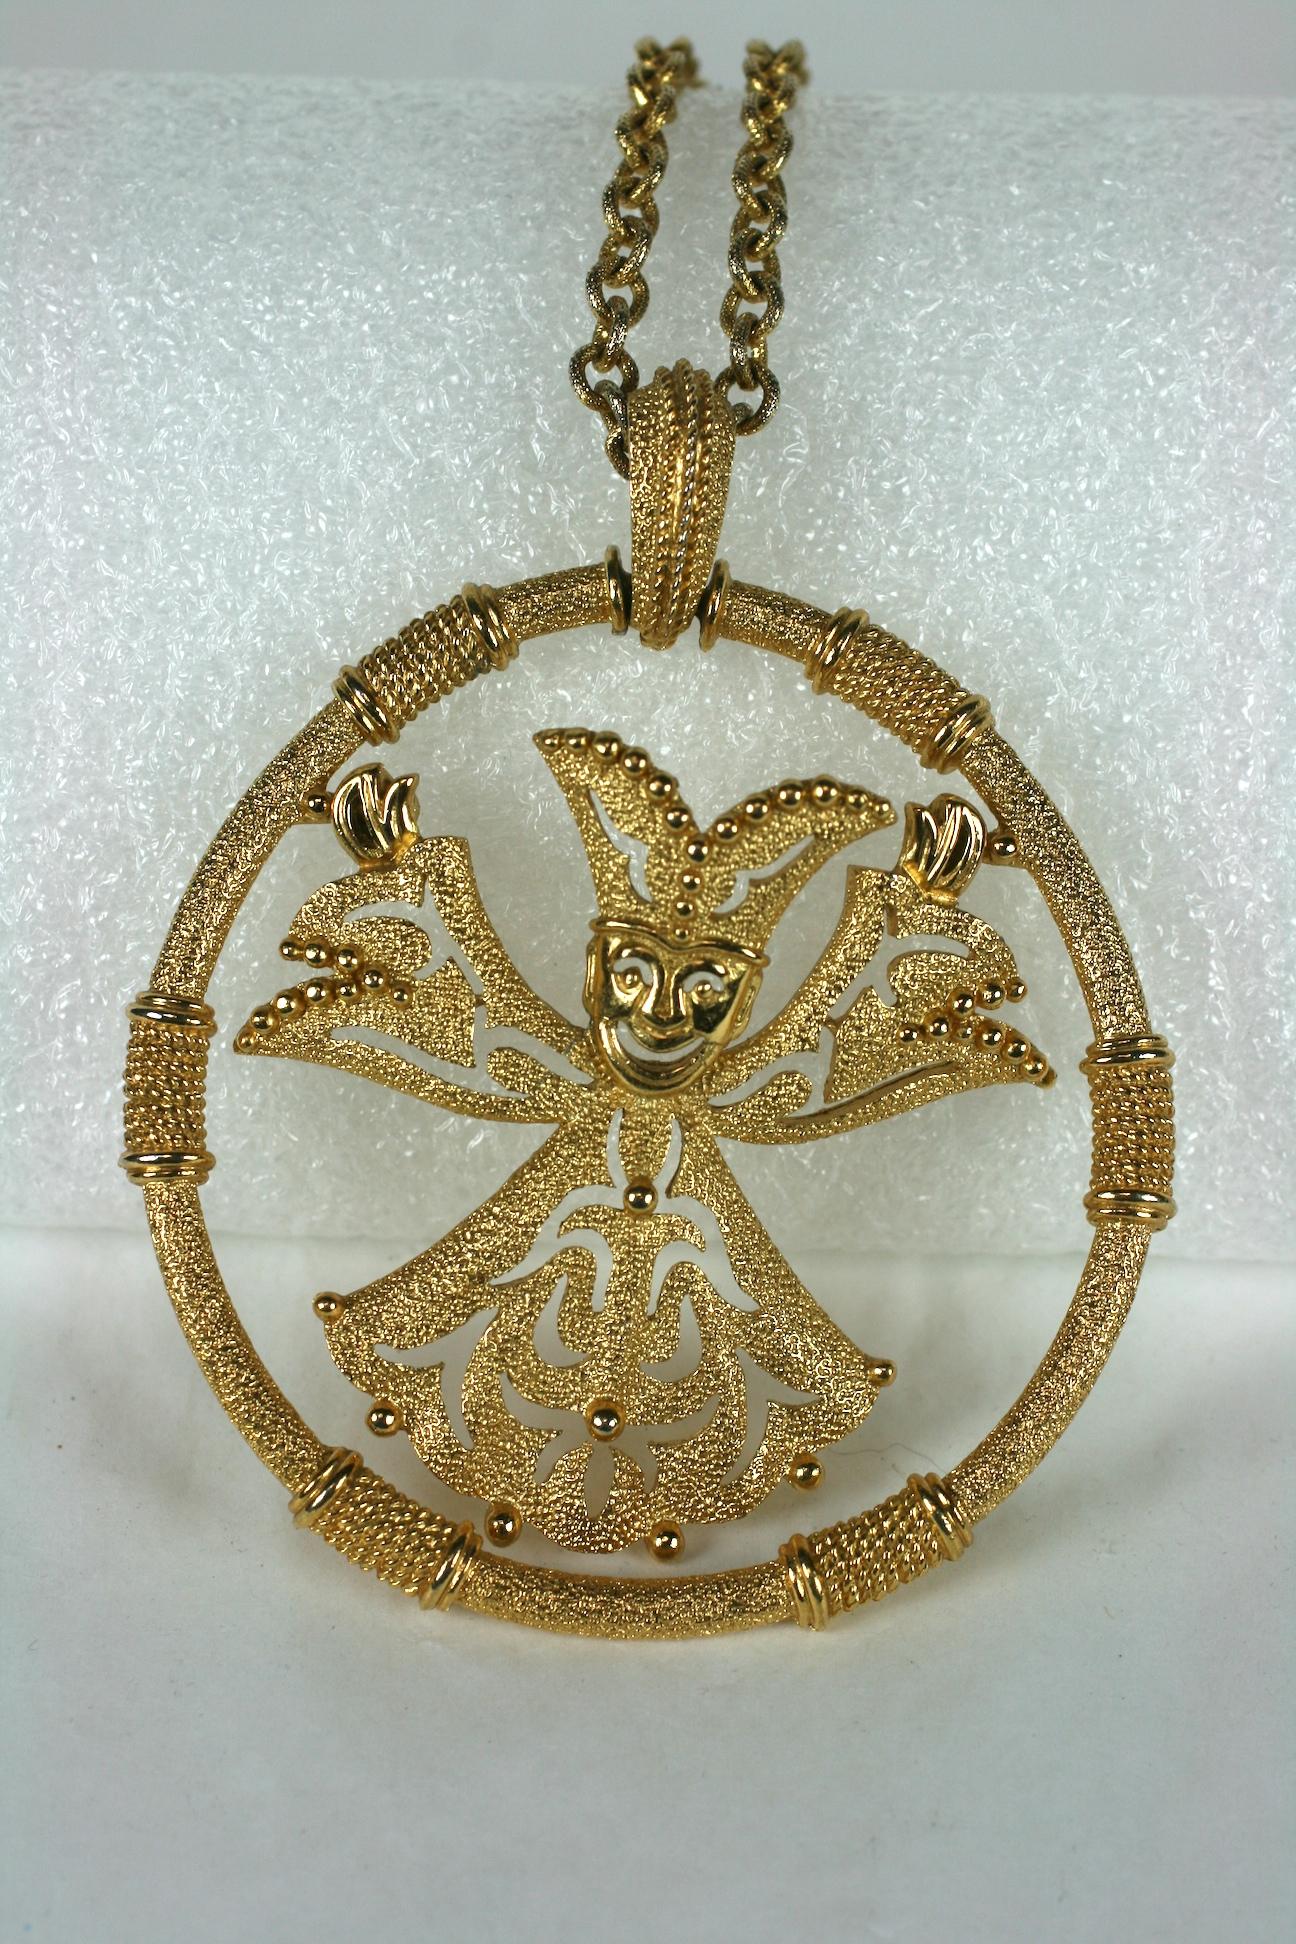 Trifari Articulated Jester Pendant from the 1970's with wild figure set within a textured gilt hoop. Large in scale with unusual motif which swings within pendant.
Chain measures 18